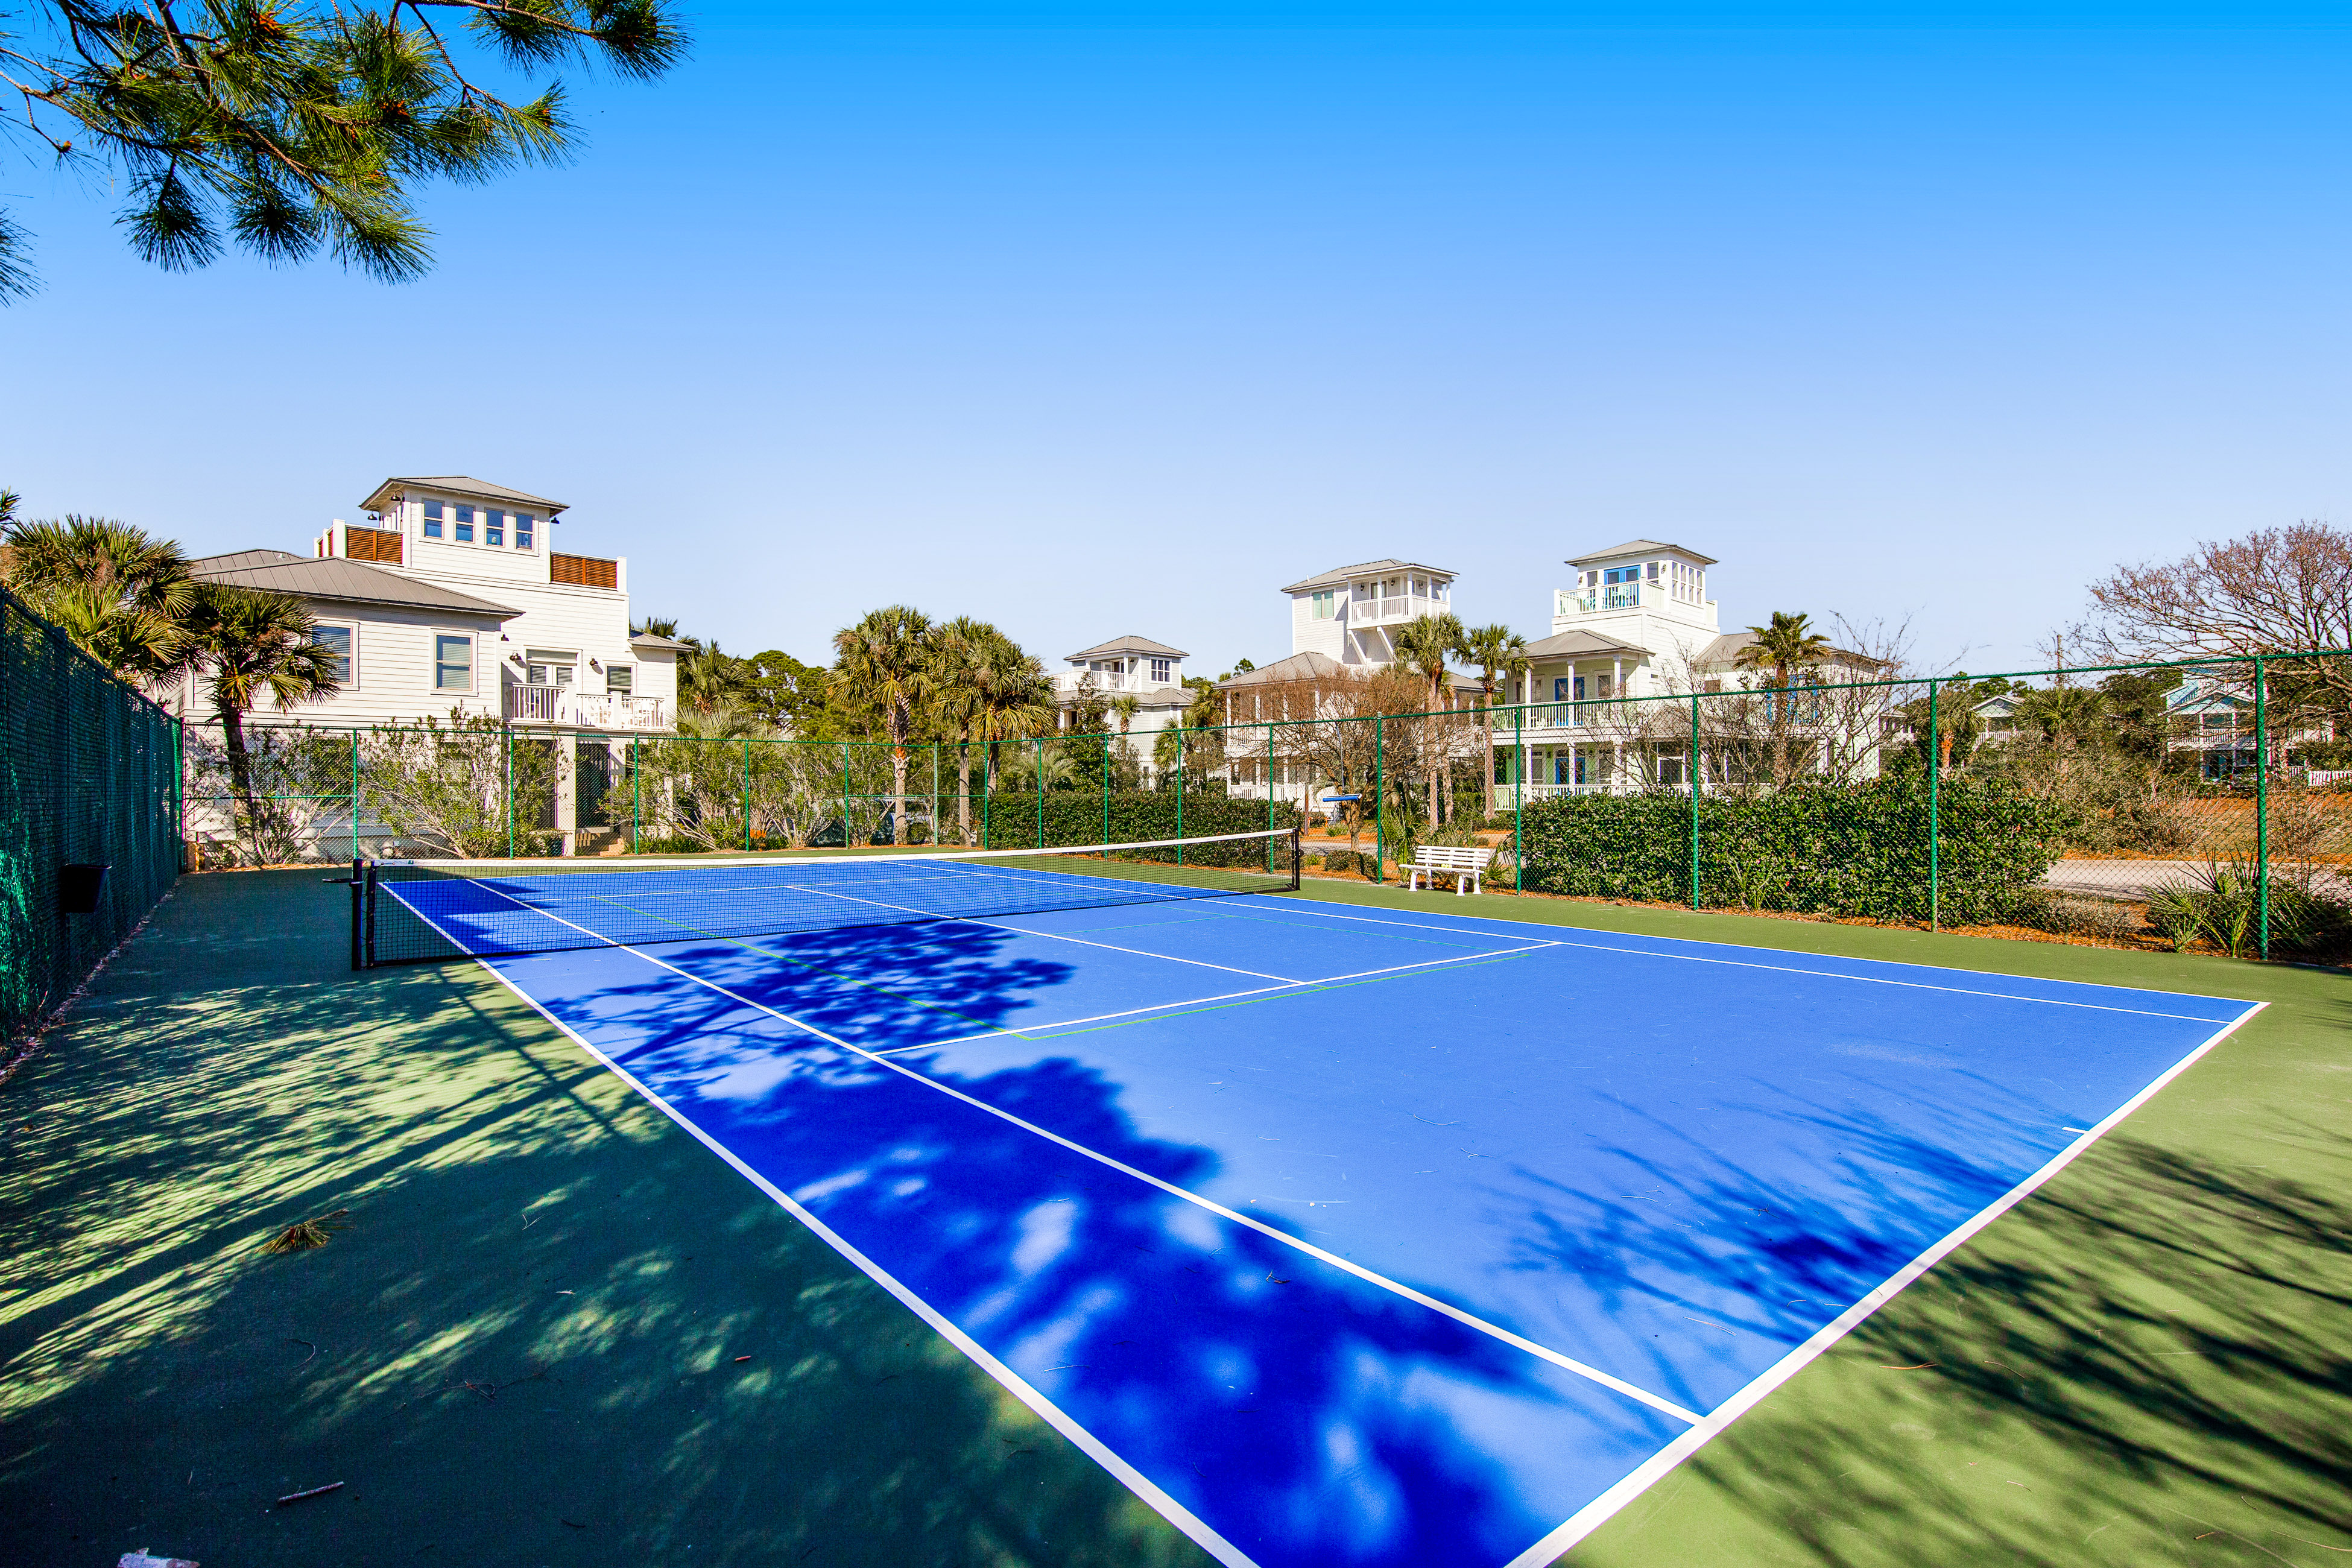 Dunes of Seagrove A210 Condo rental in Dunes of Seagrove in Highway 30-A Florida - #33